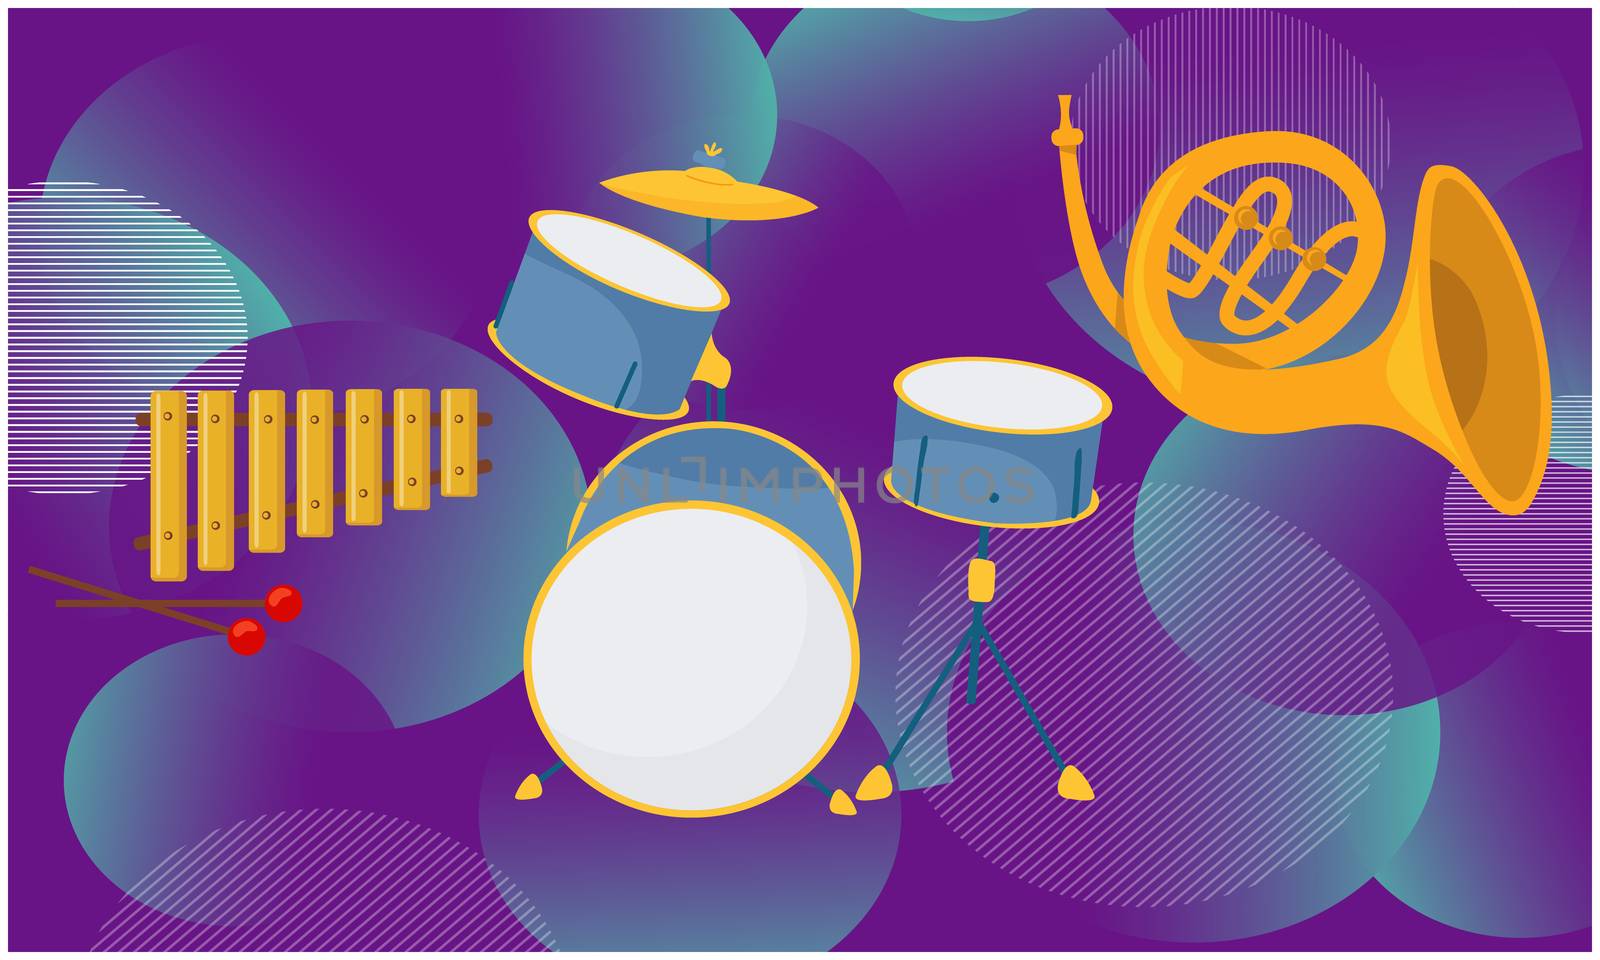 mock illustration of musical instruments on abstract background